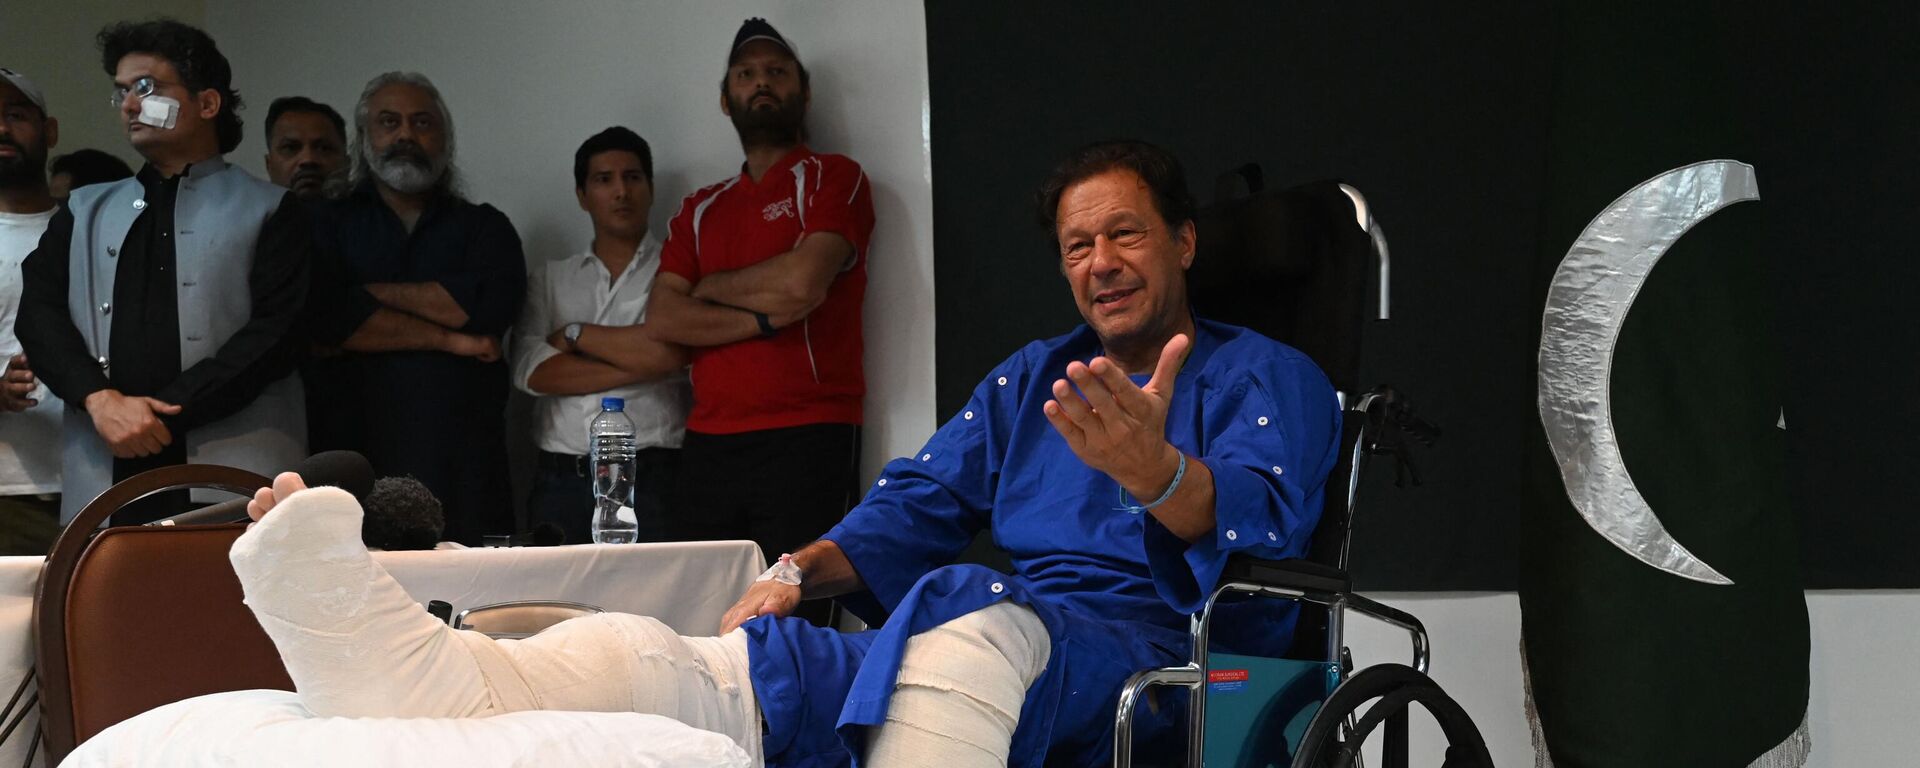 Pakistan's former prime minister Imran Khan talk with media representatives at a hospital in Lahore on November 4, 2022,  a day after an assassination attempt on him during his long march near Wazirabad. - Sputnik International, 1920, 25.11.2022